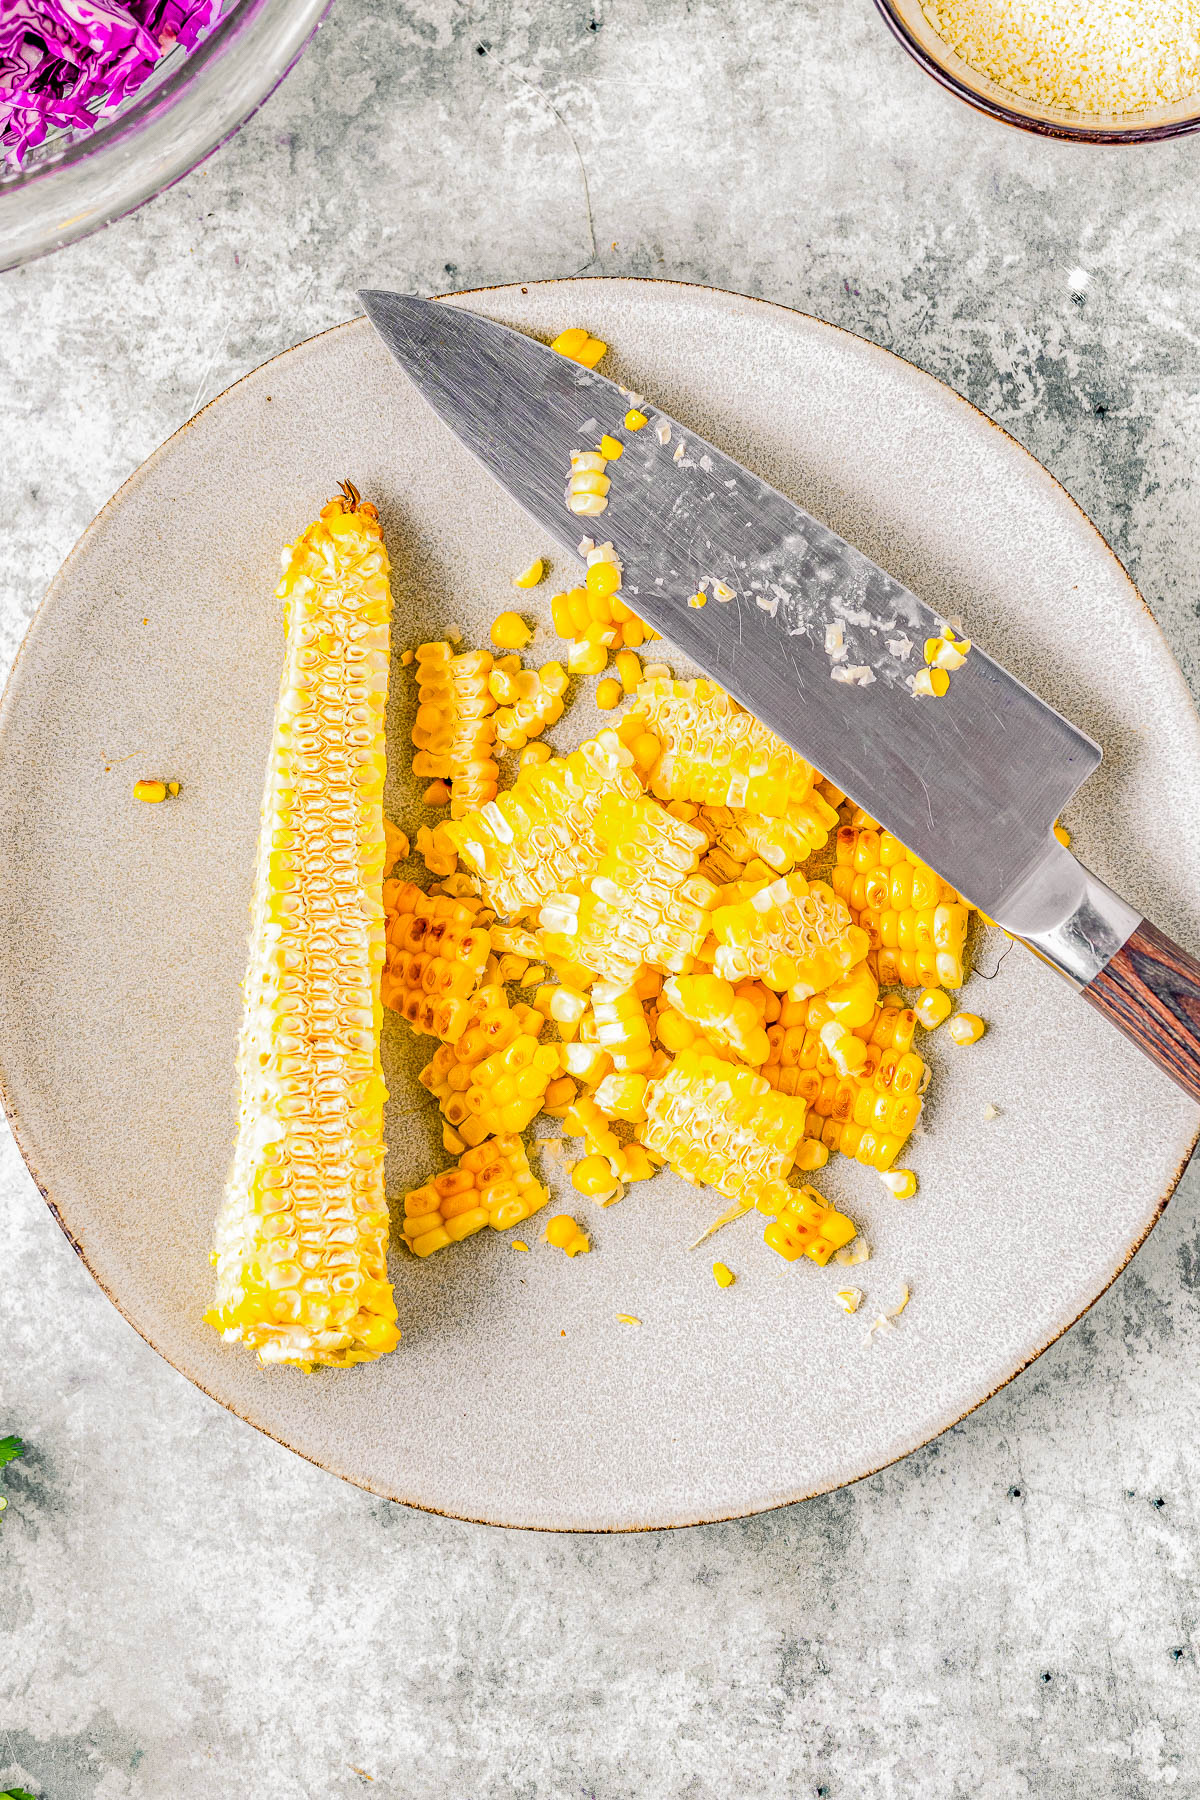 A knife cutting through corn on the cob on a plate, with kernels scattered and a bowl of cabbage nearby on a textured surface.